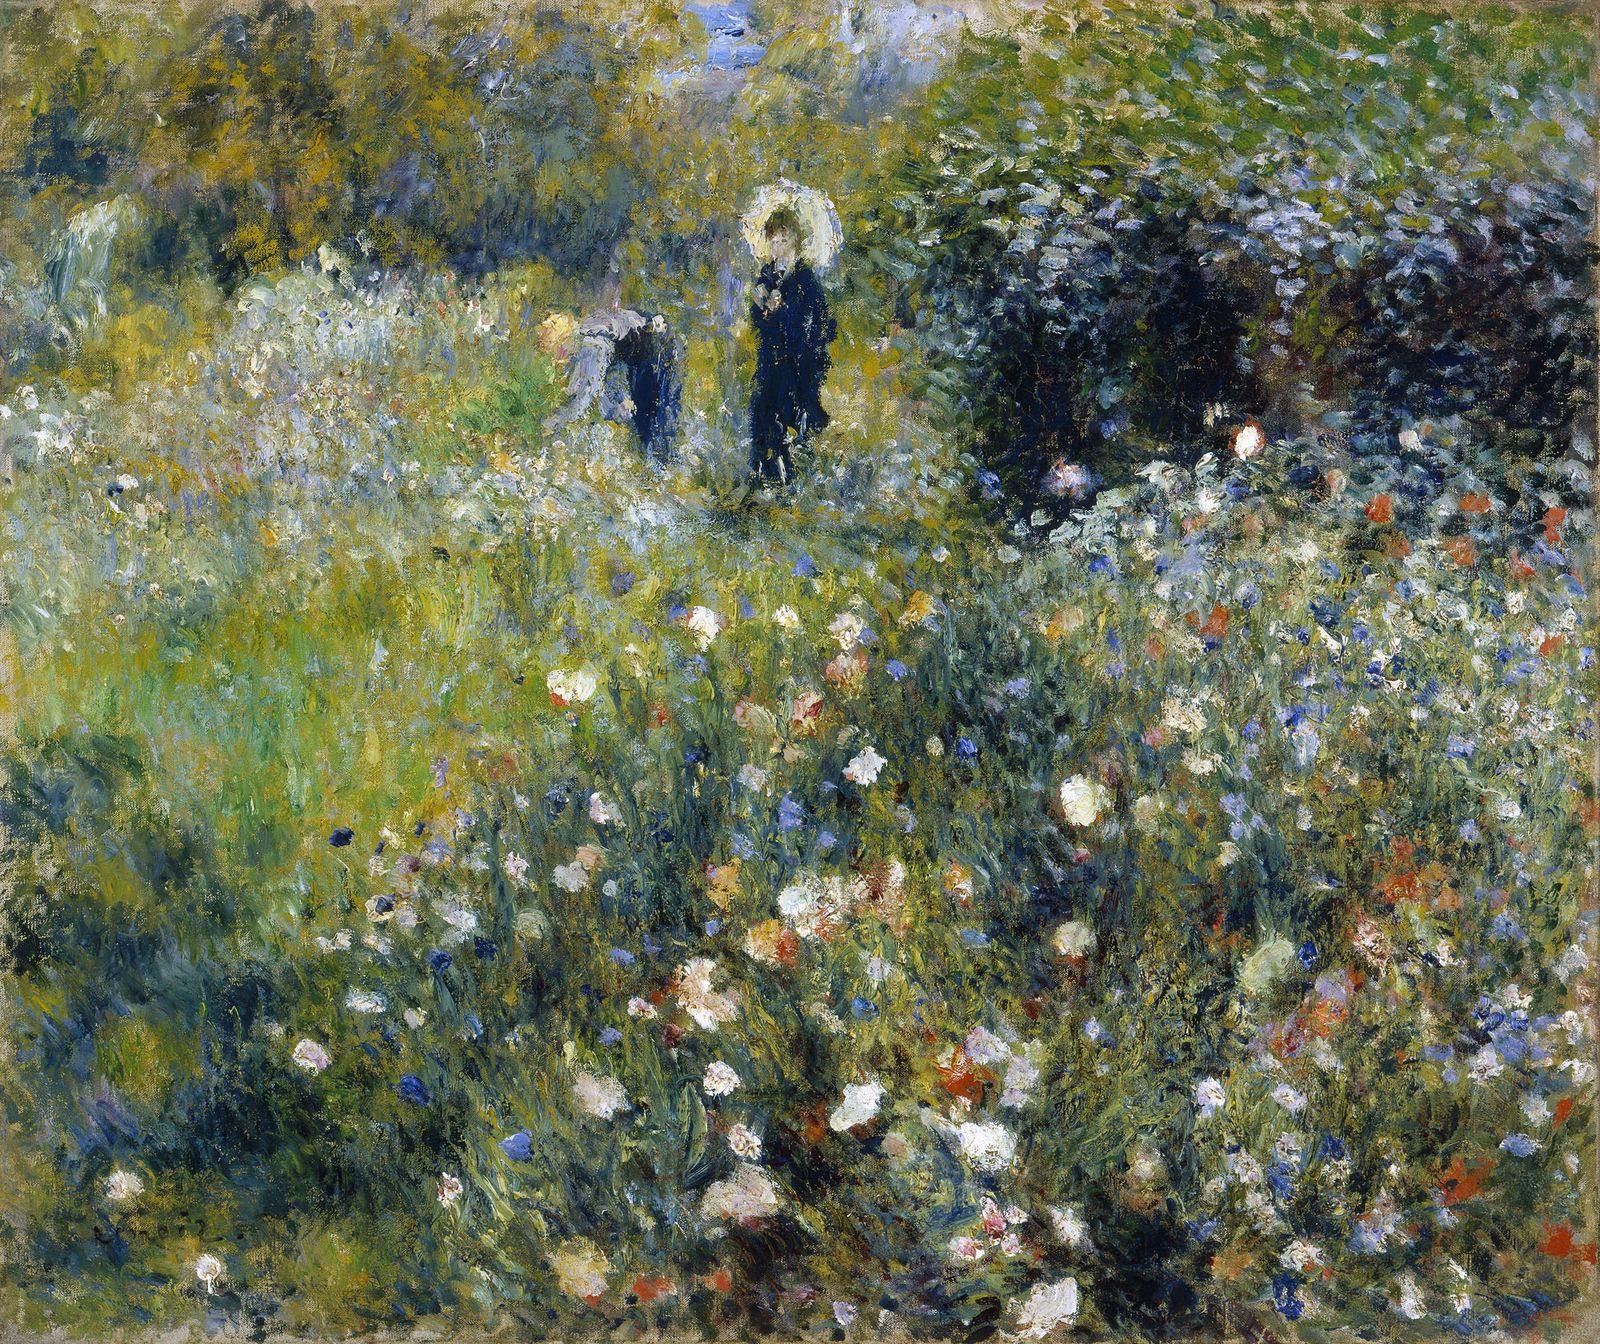 https://impressionism.su/renoir/picture/Woman%20with%20a%20Parasol%20in%20a%20Garden.jpg